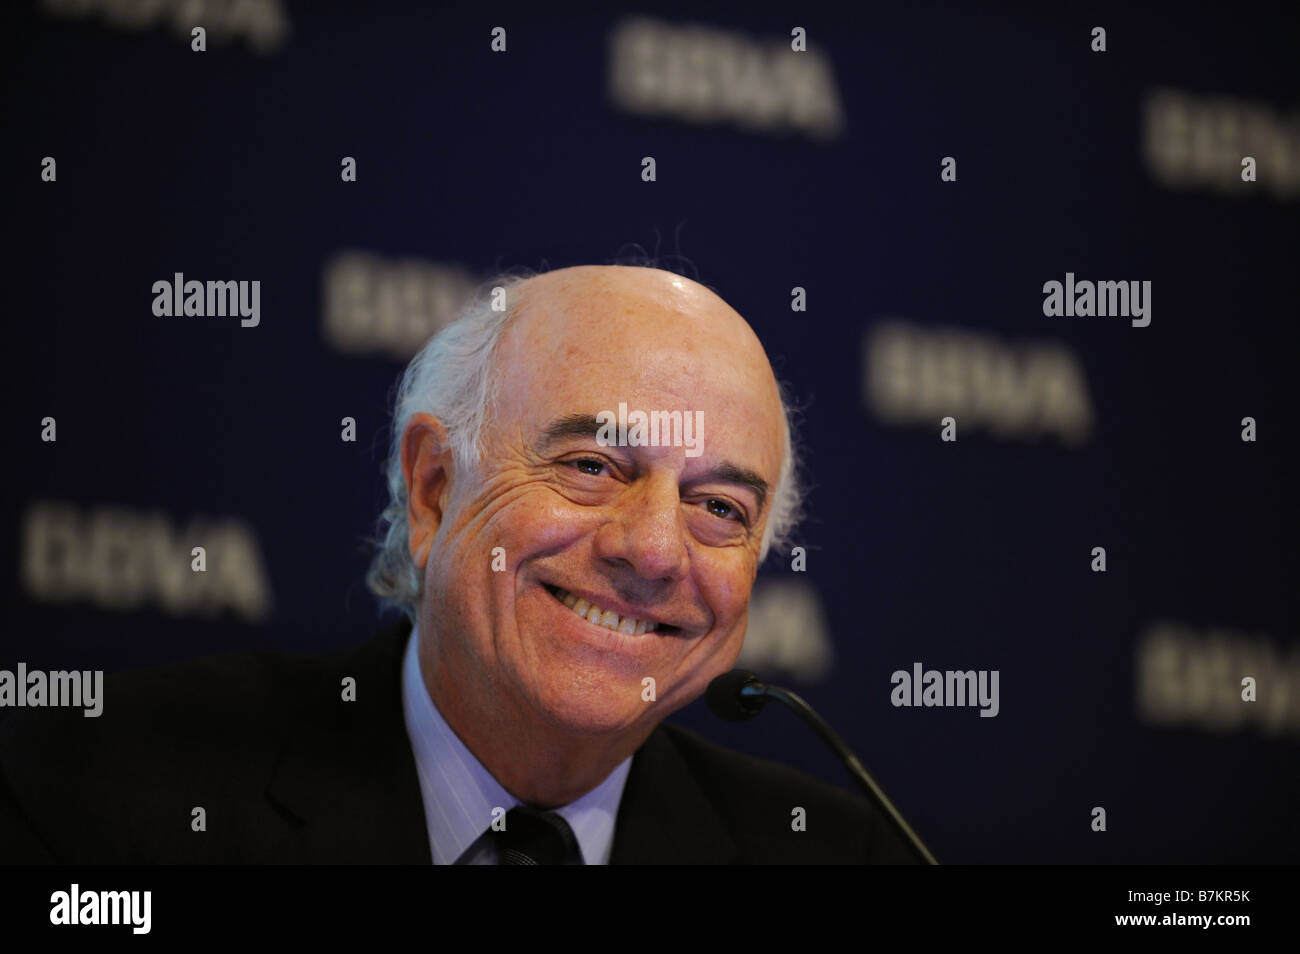 Francisco Gonzalez chairman of Banco Bilbao Vizcaya Argentaria SA during a news conference in Madrid Spain Stock Photo